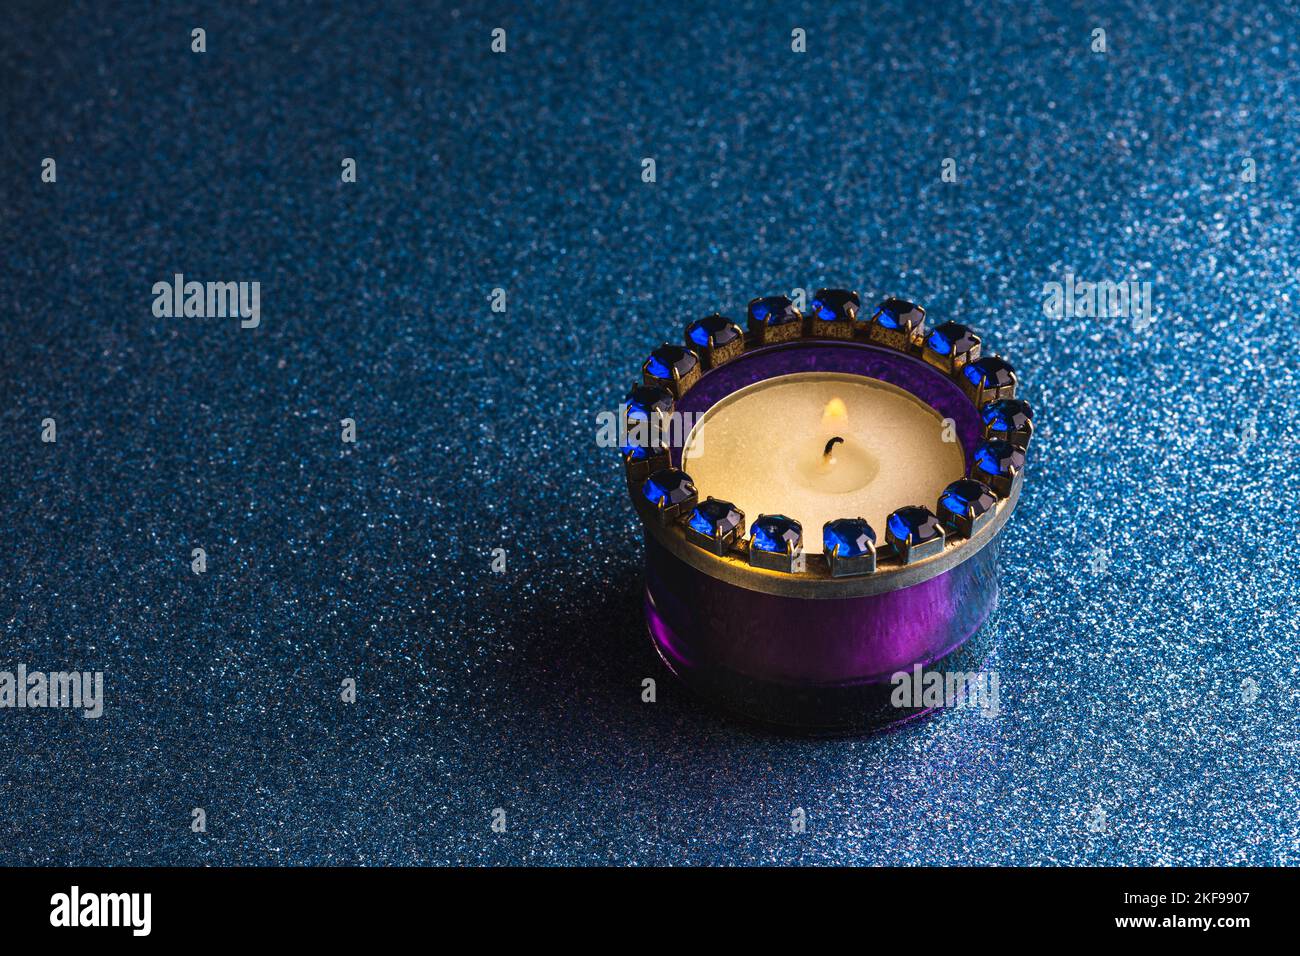 A burning tea light candle in a purple glass holder against a dark blue background with glitter. Stock Photo